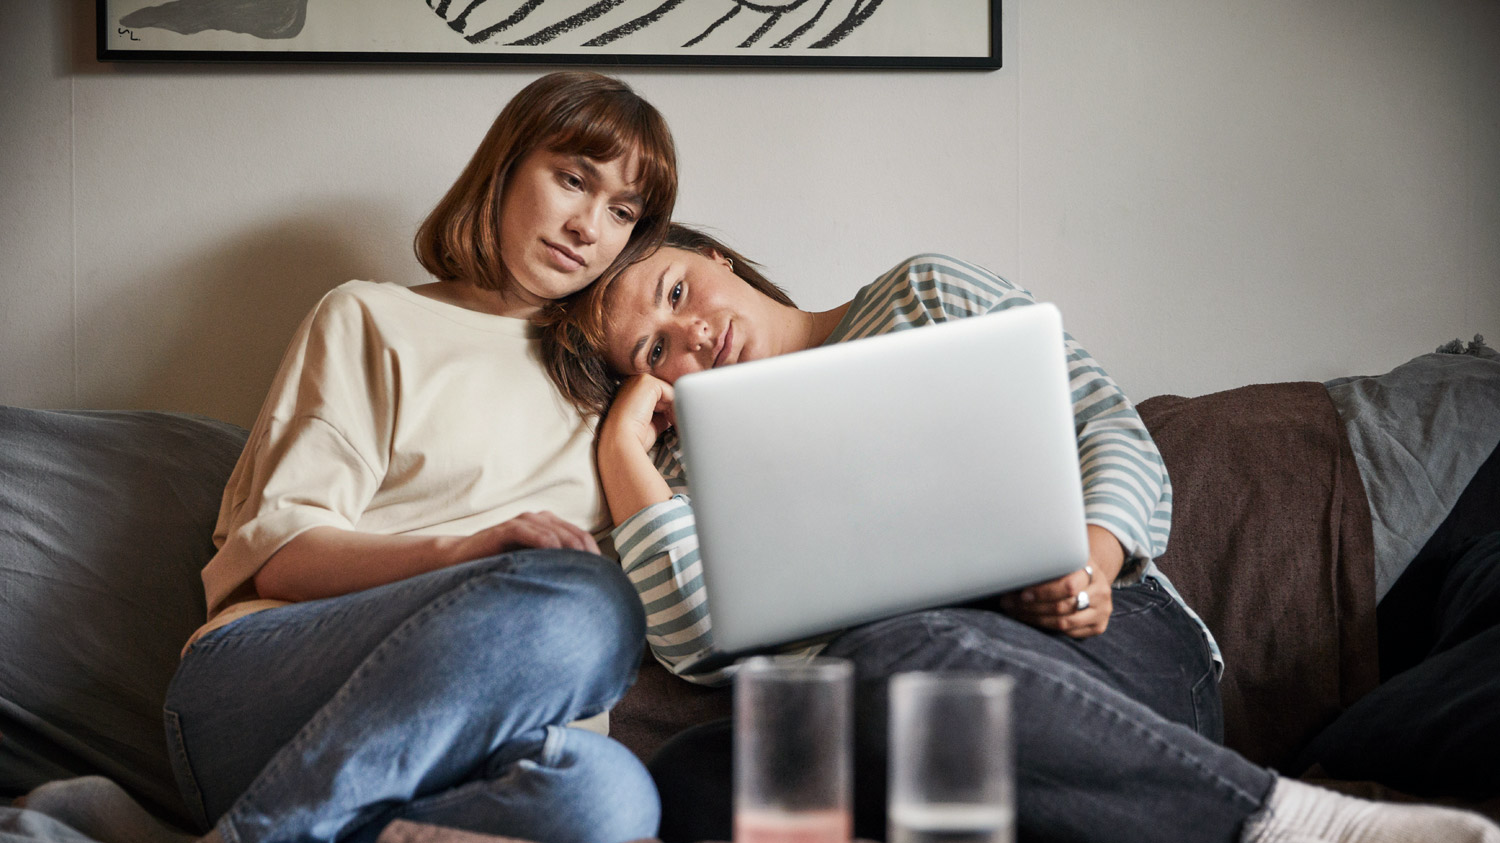 An image of two female friends in the sofa looking at a laptop